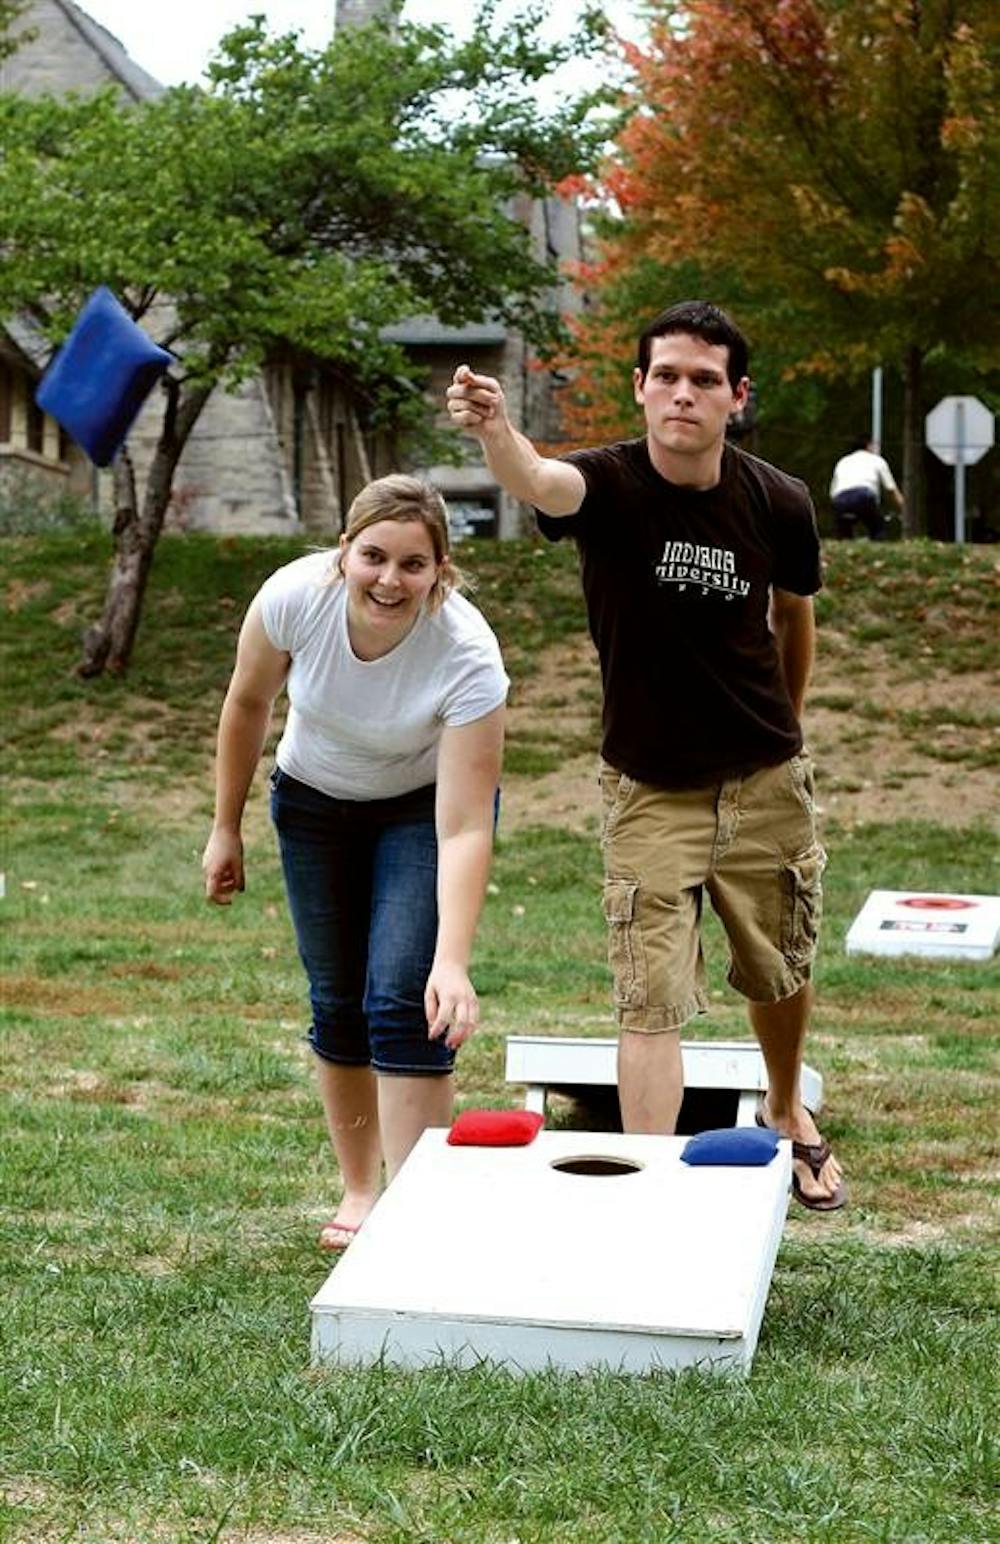 Sophomores Jeremy Crowe and Noreen Posge compete during the first round of cornhole games during the World's Largest Cornhole Tournament on Oct. 17, 2007 in Dunn Meadow. The event included catered foot and live music.